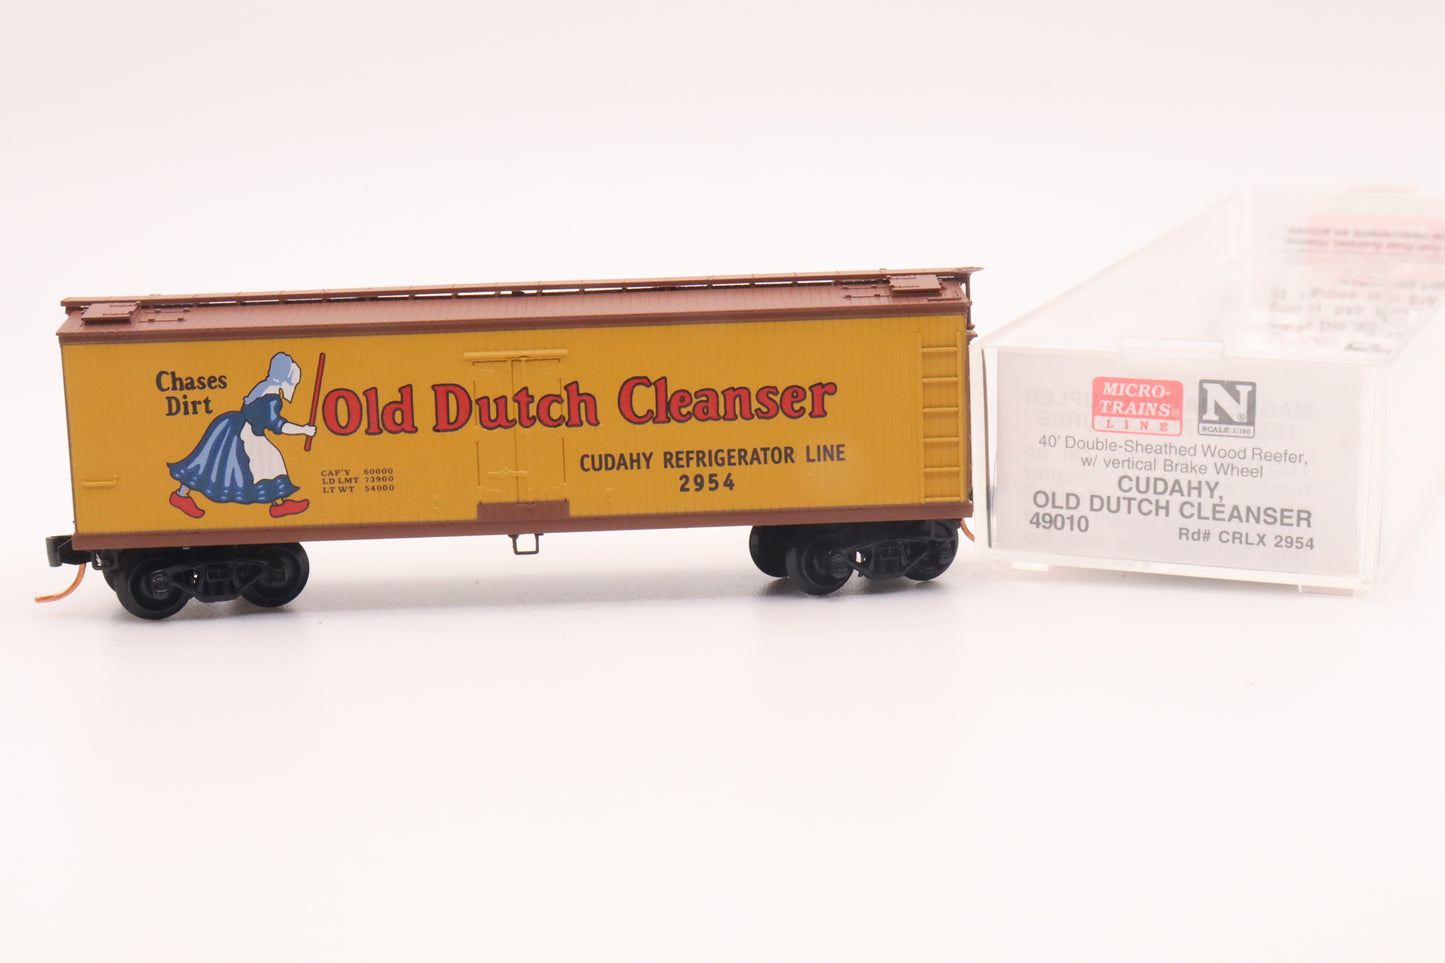 MTL-49010 - 40' Double-Sheathed Wood Reefer w/ Vertical Brake Wheel - Old Dutch Cleanser - CDL-2954